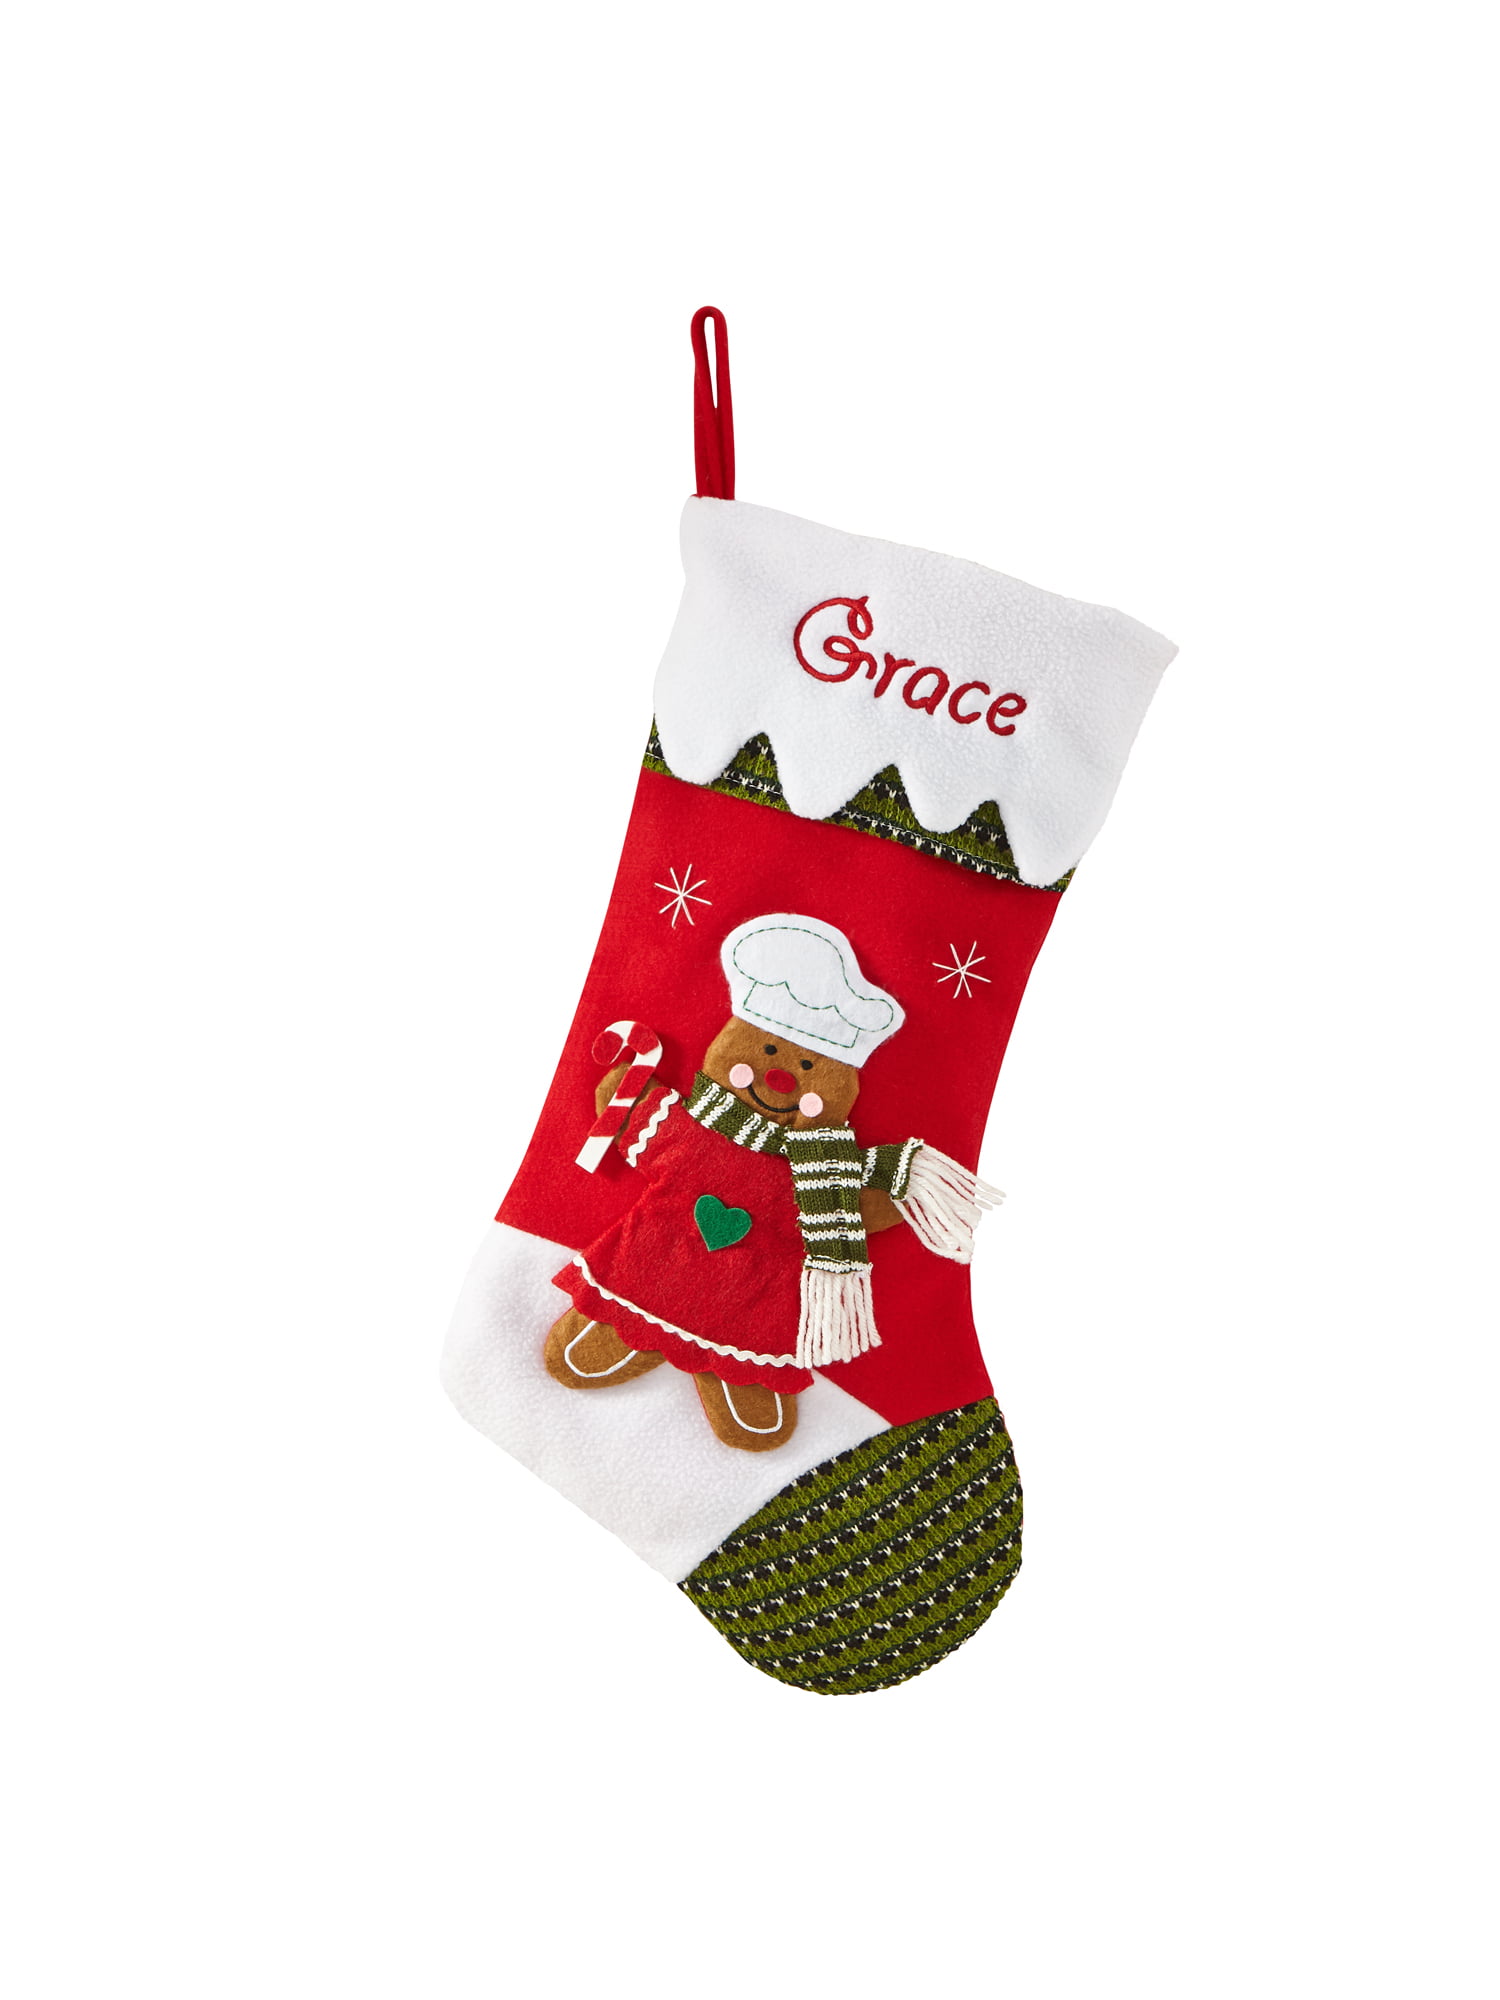 10 Unique Christmas Stockings for 2020 - Personalized Christmas Stockings